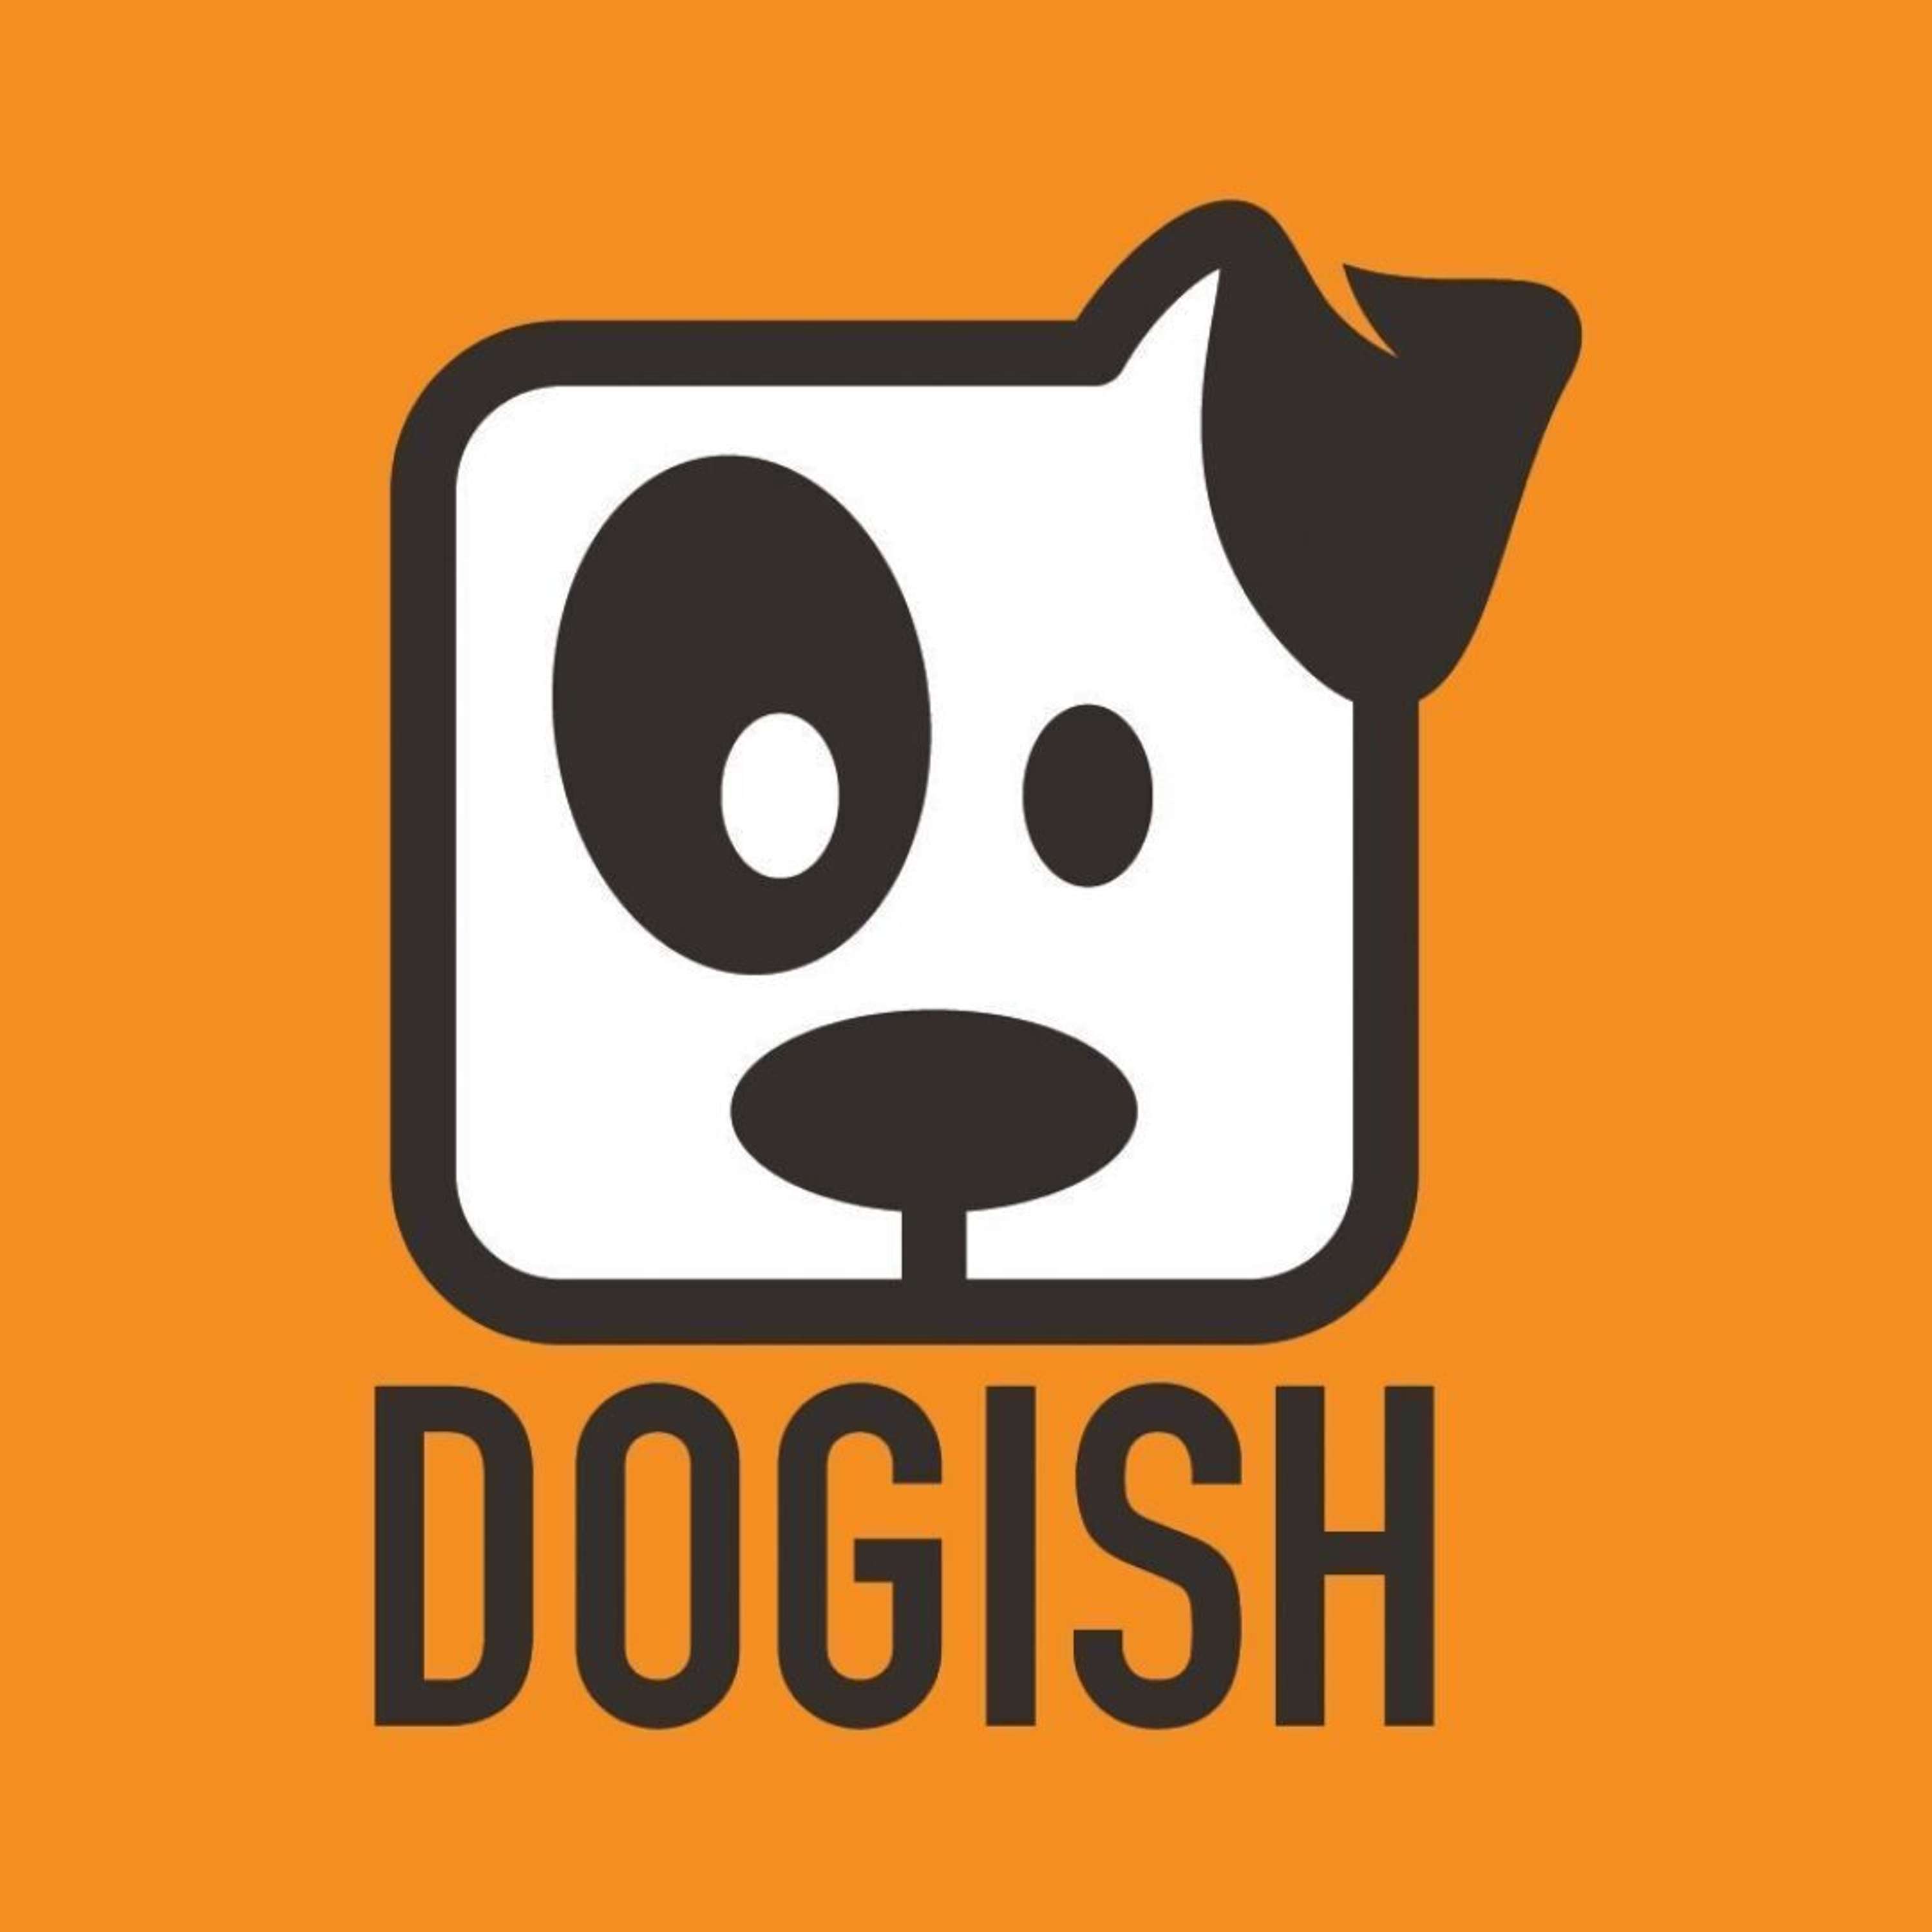 Dogish Podcast - Inspiration Of A Hallmark Show with Larissa Wohl 08/24/21